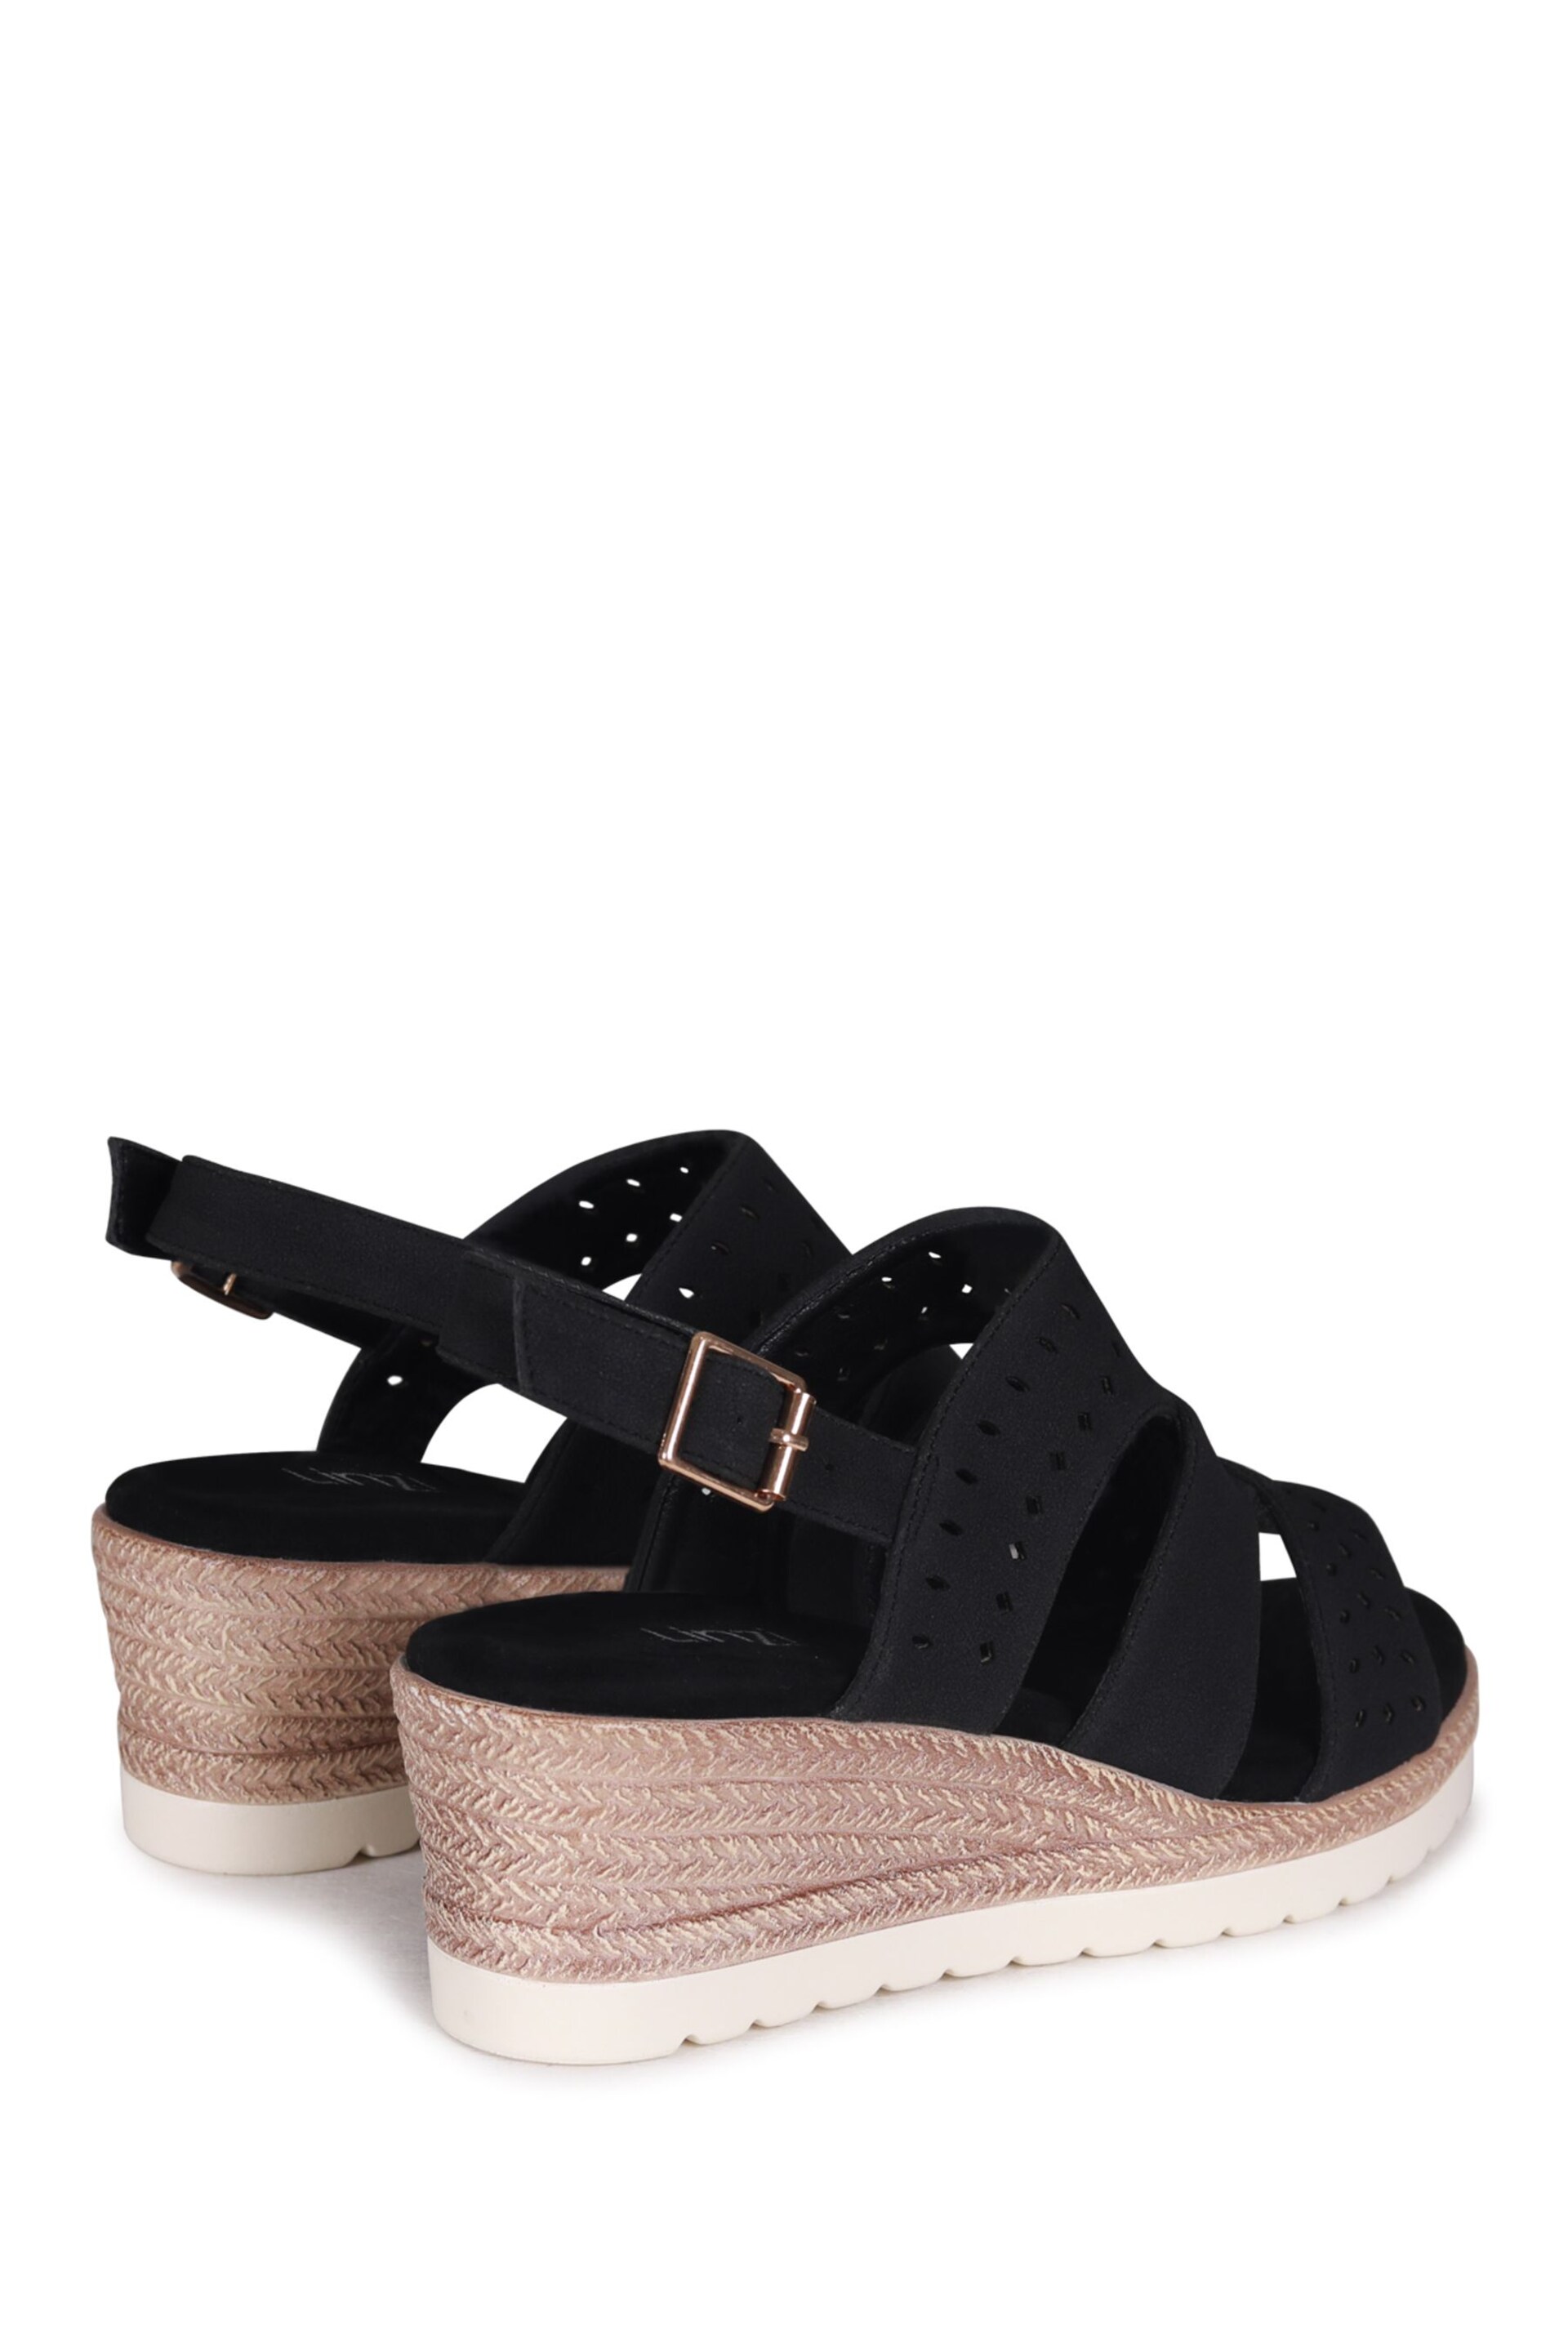 Linzi Black Caryn Wedge Sandals With Cut Out Front Straps - Image 4 of 4